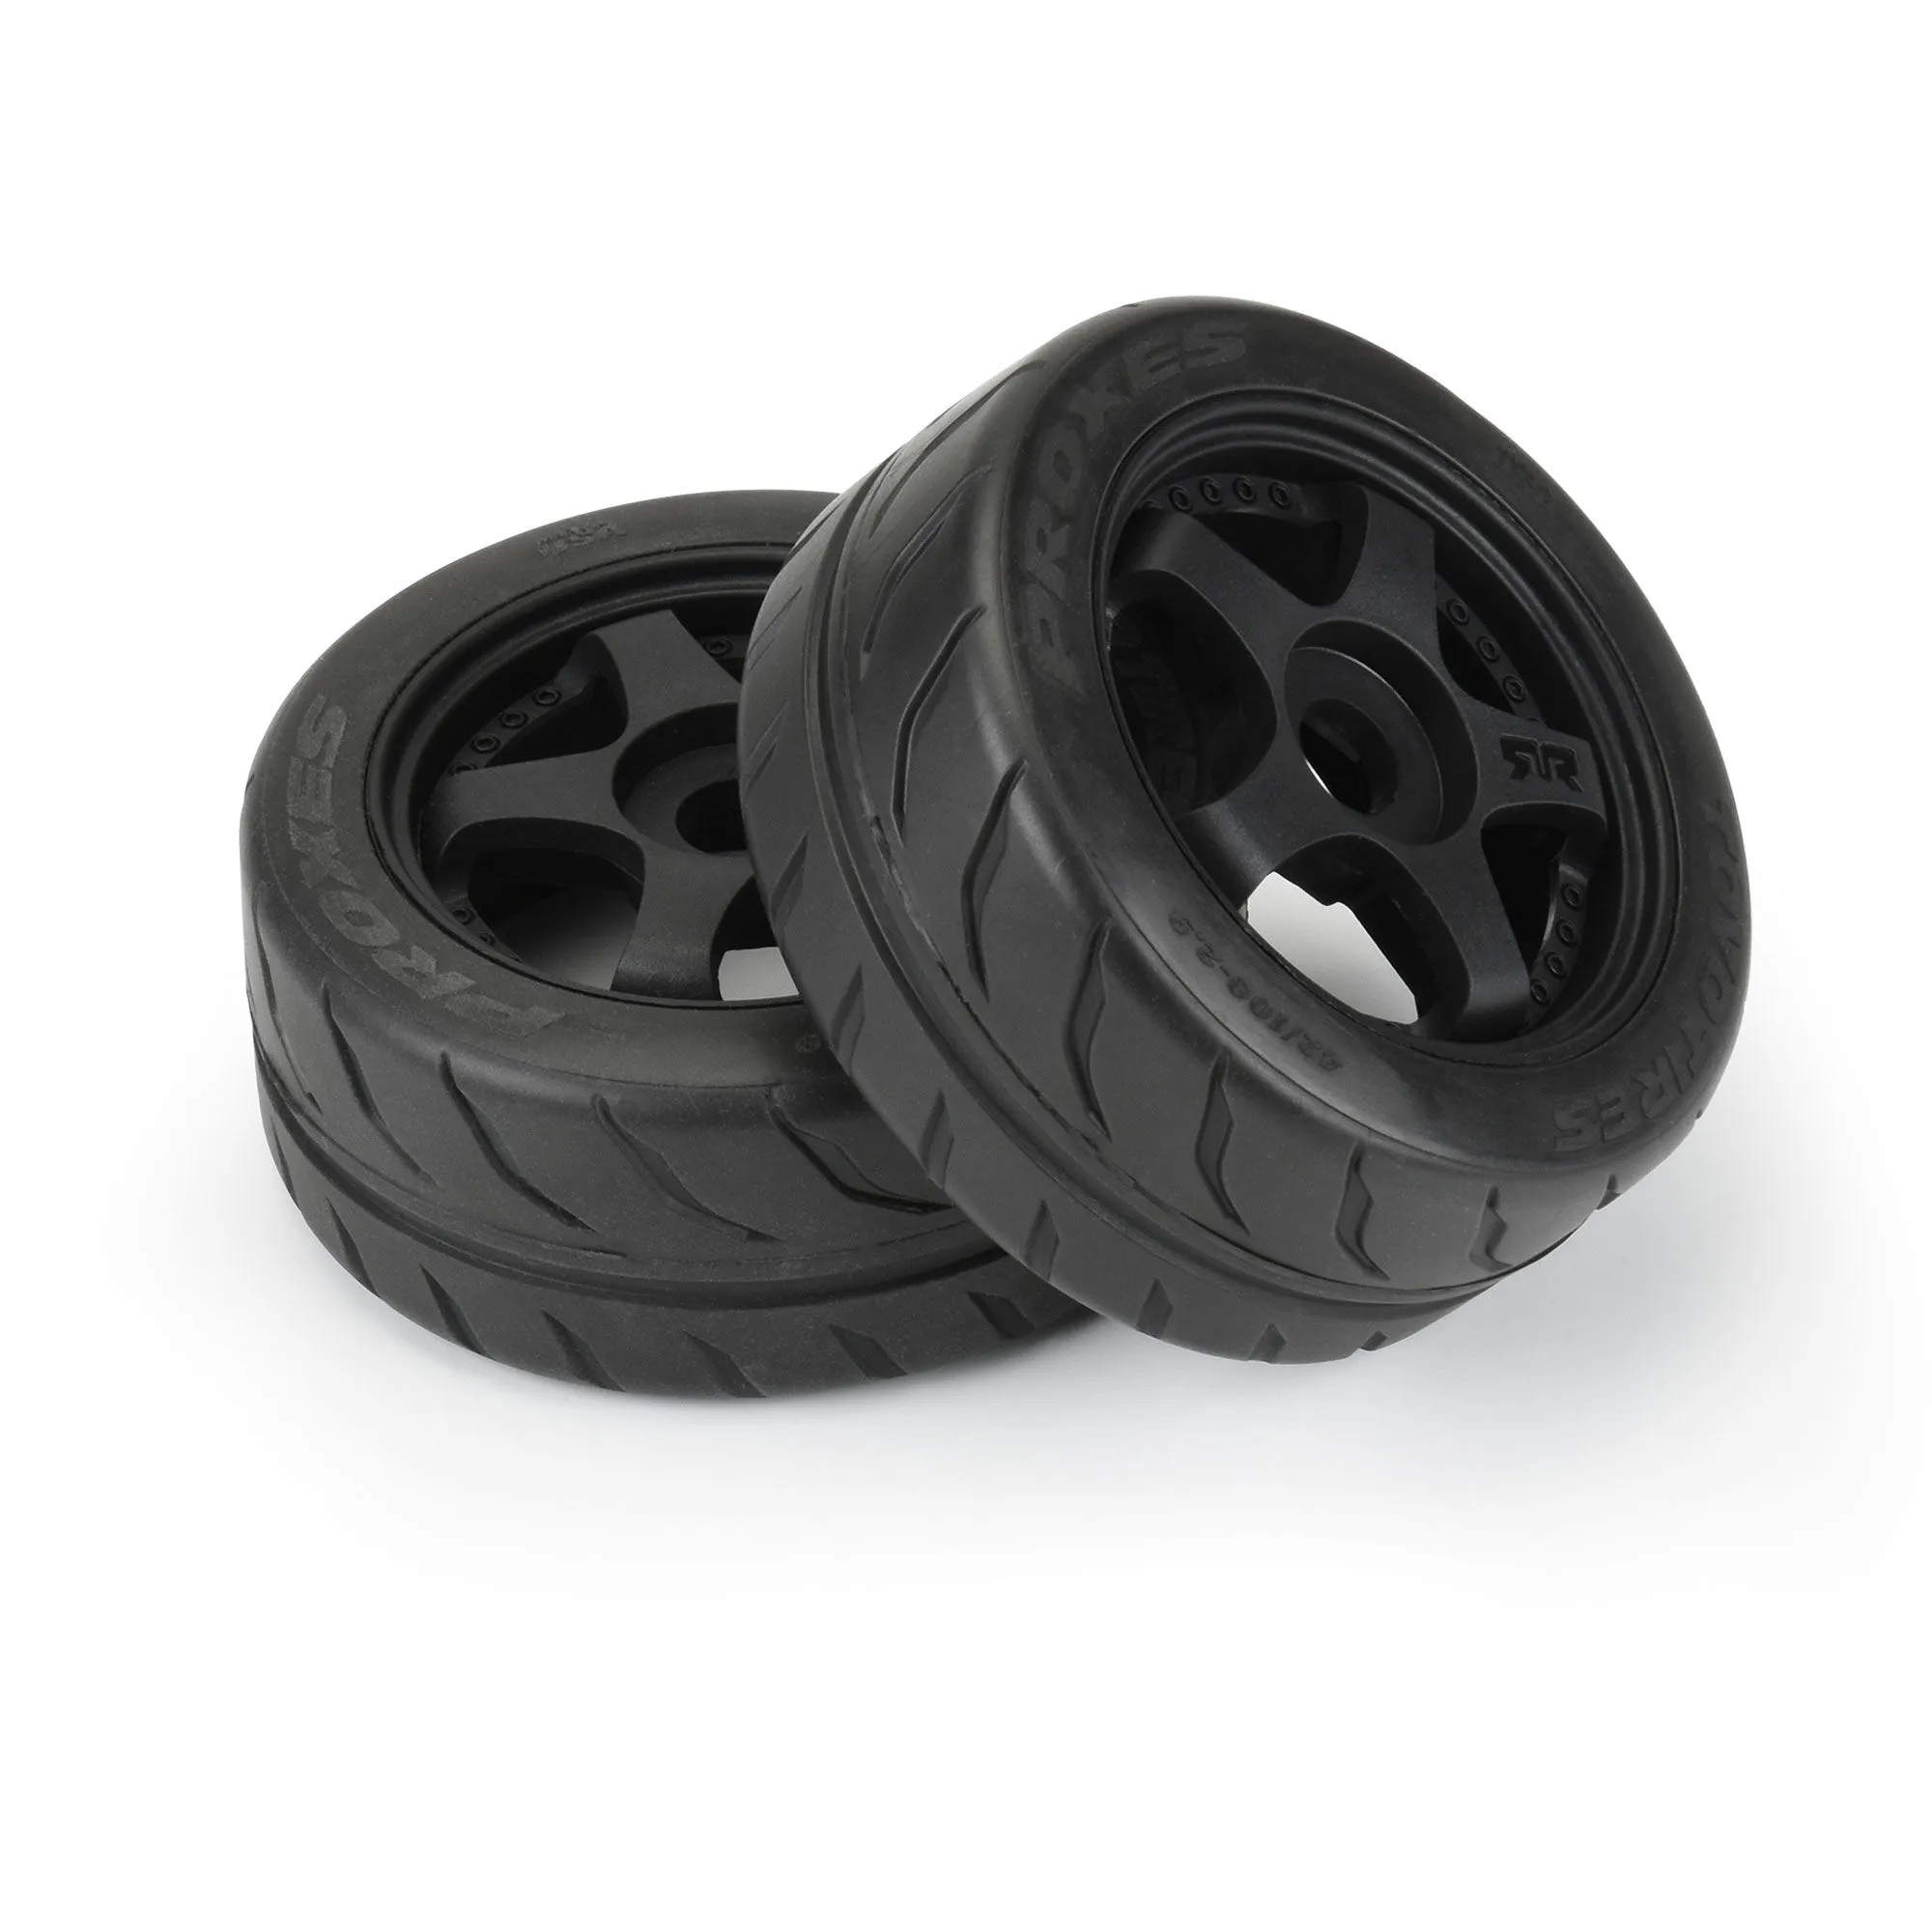 Proline 1/7 Toyo Proxes R888R 42/100 2.9in Belted Tyres Mounted